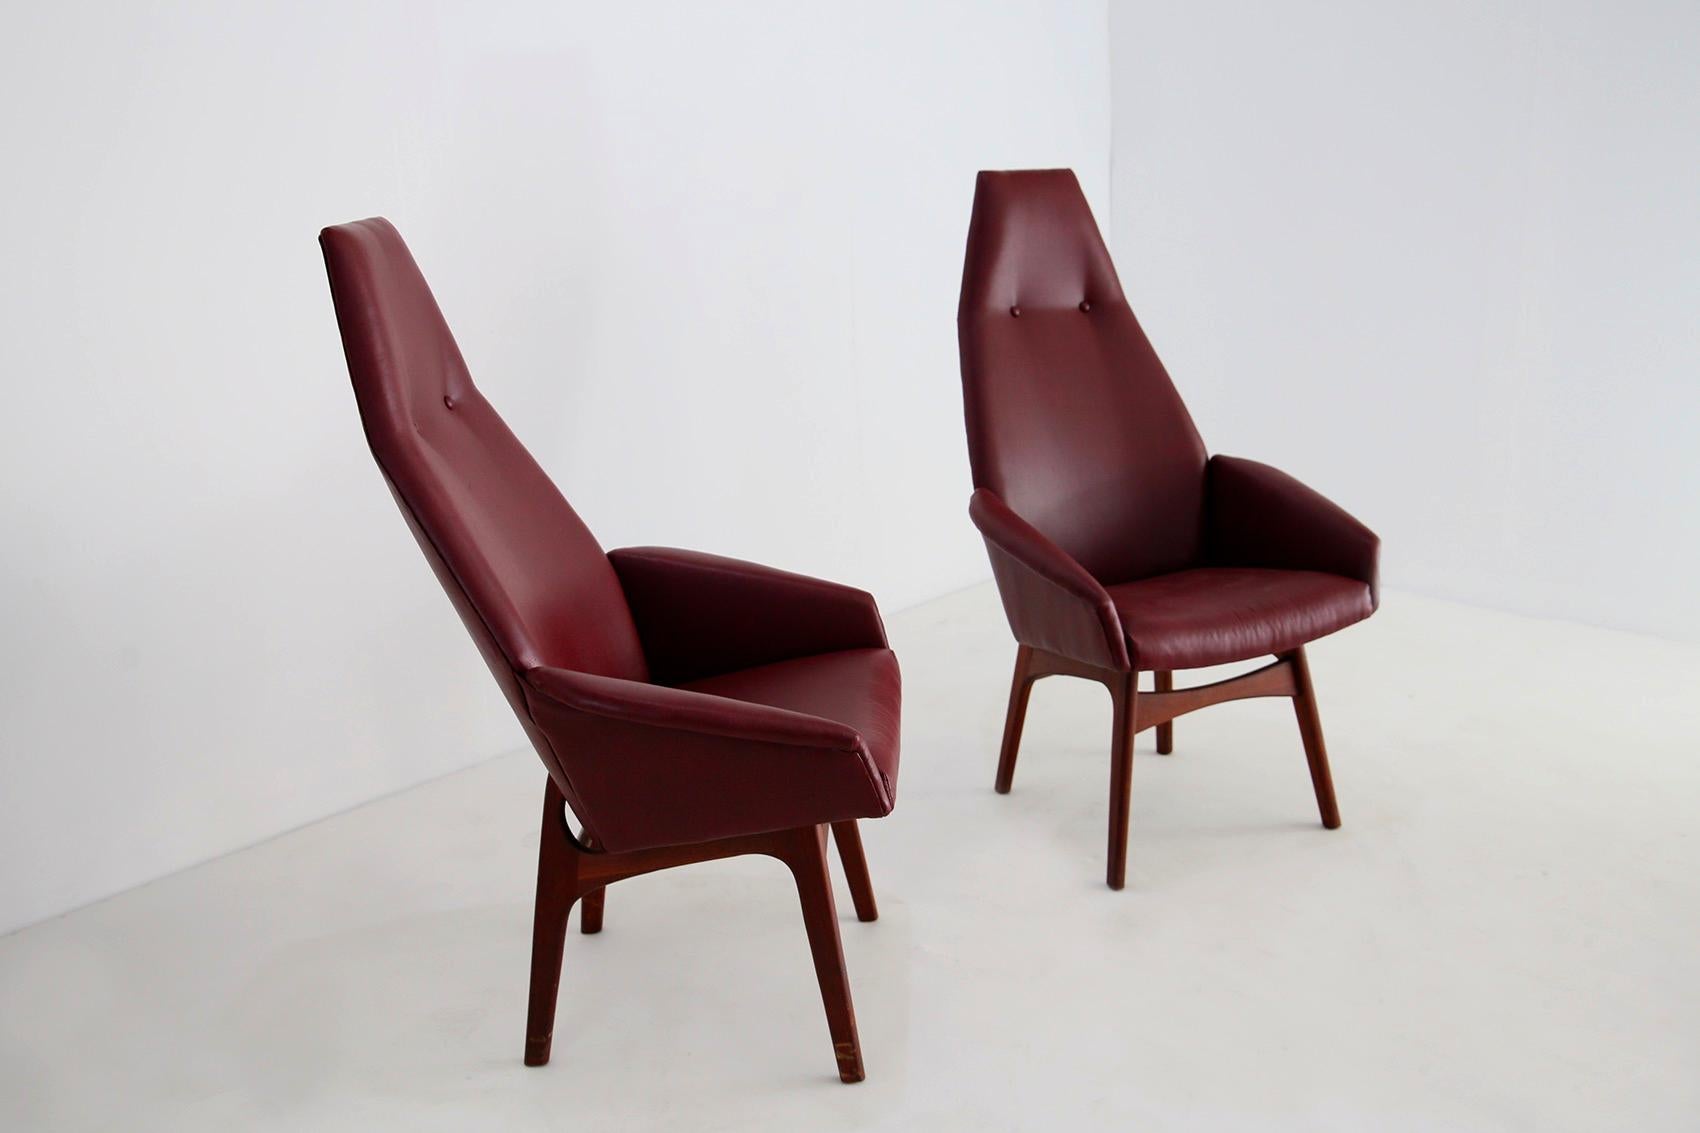 American Pair of Midcentury Armchairs by Adrian Pearsall Model Capitan in Skin, 1950s For Sale